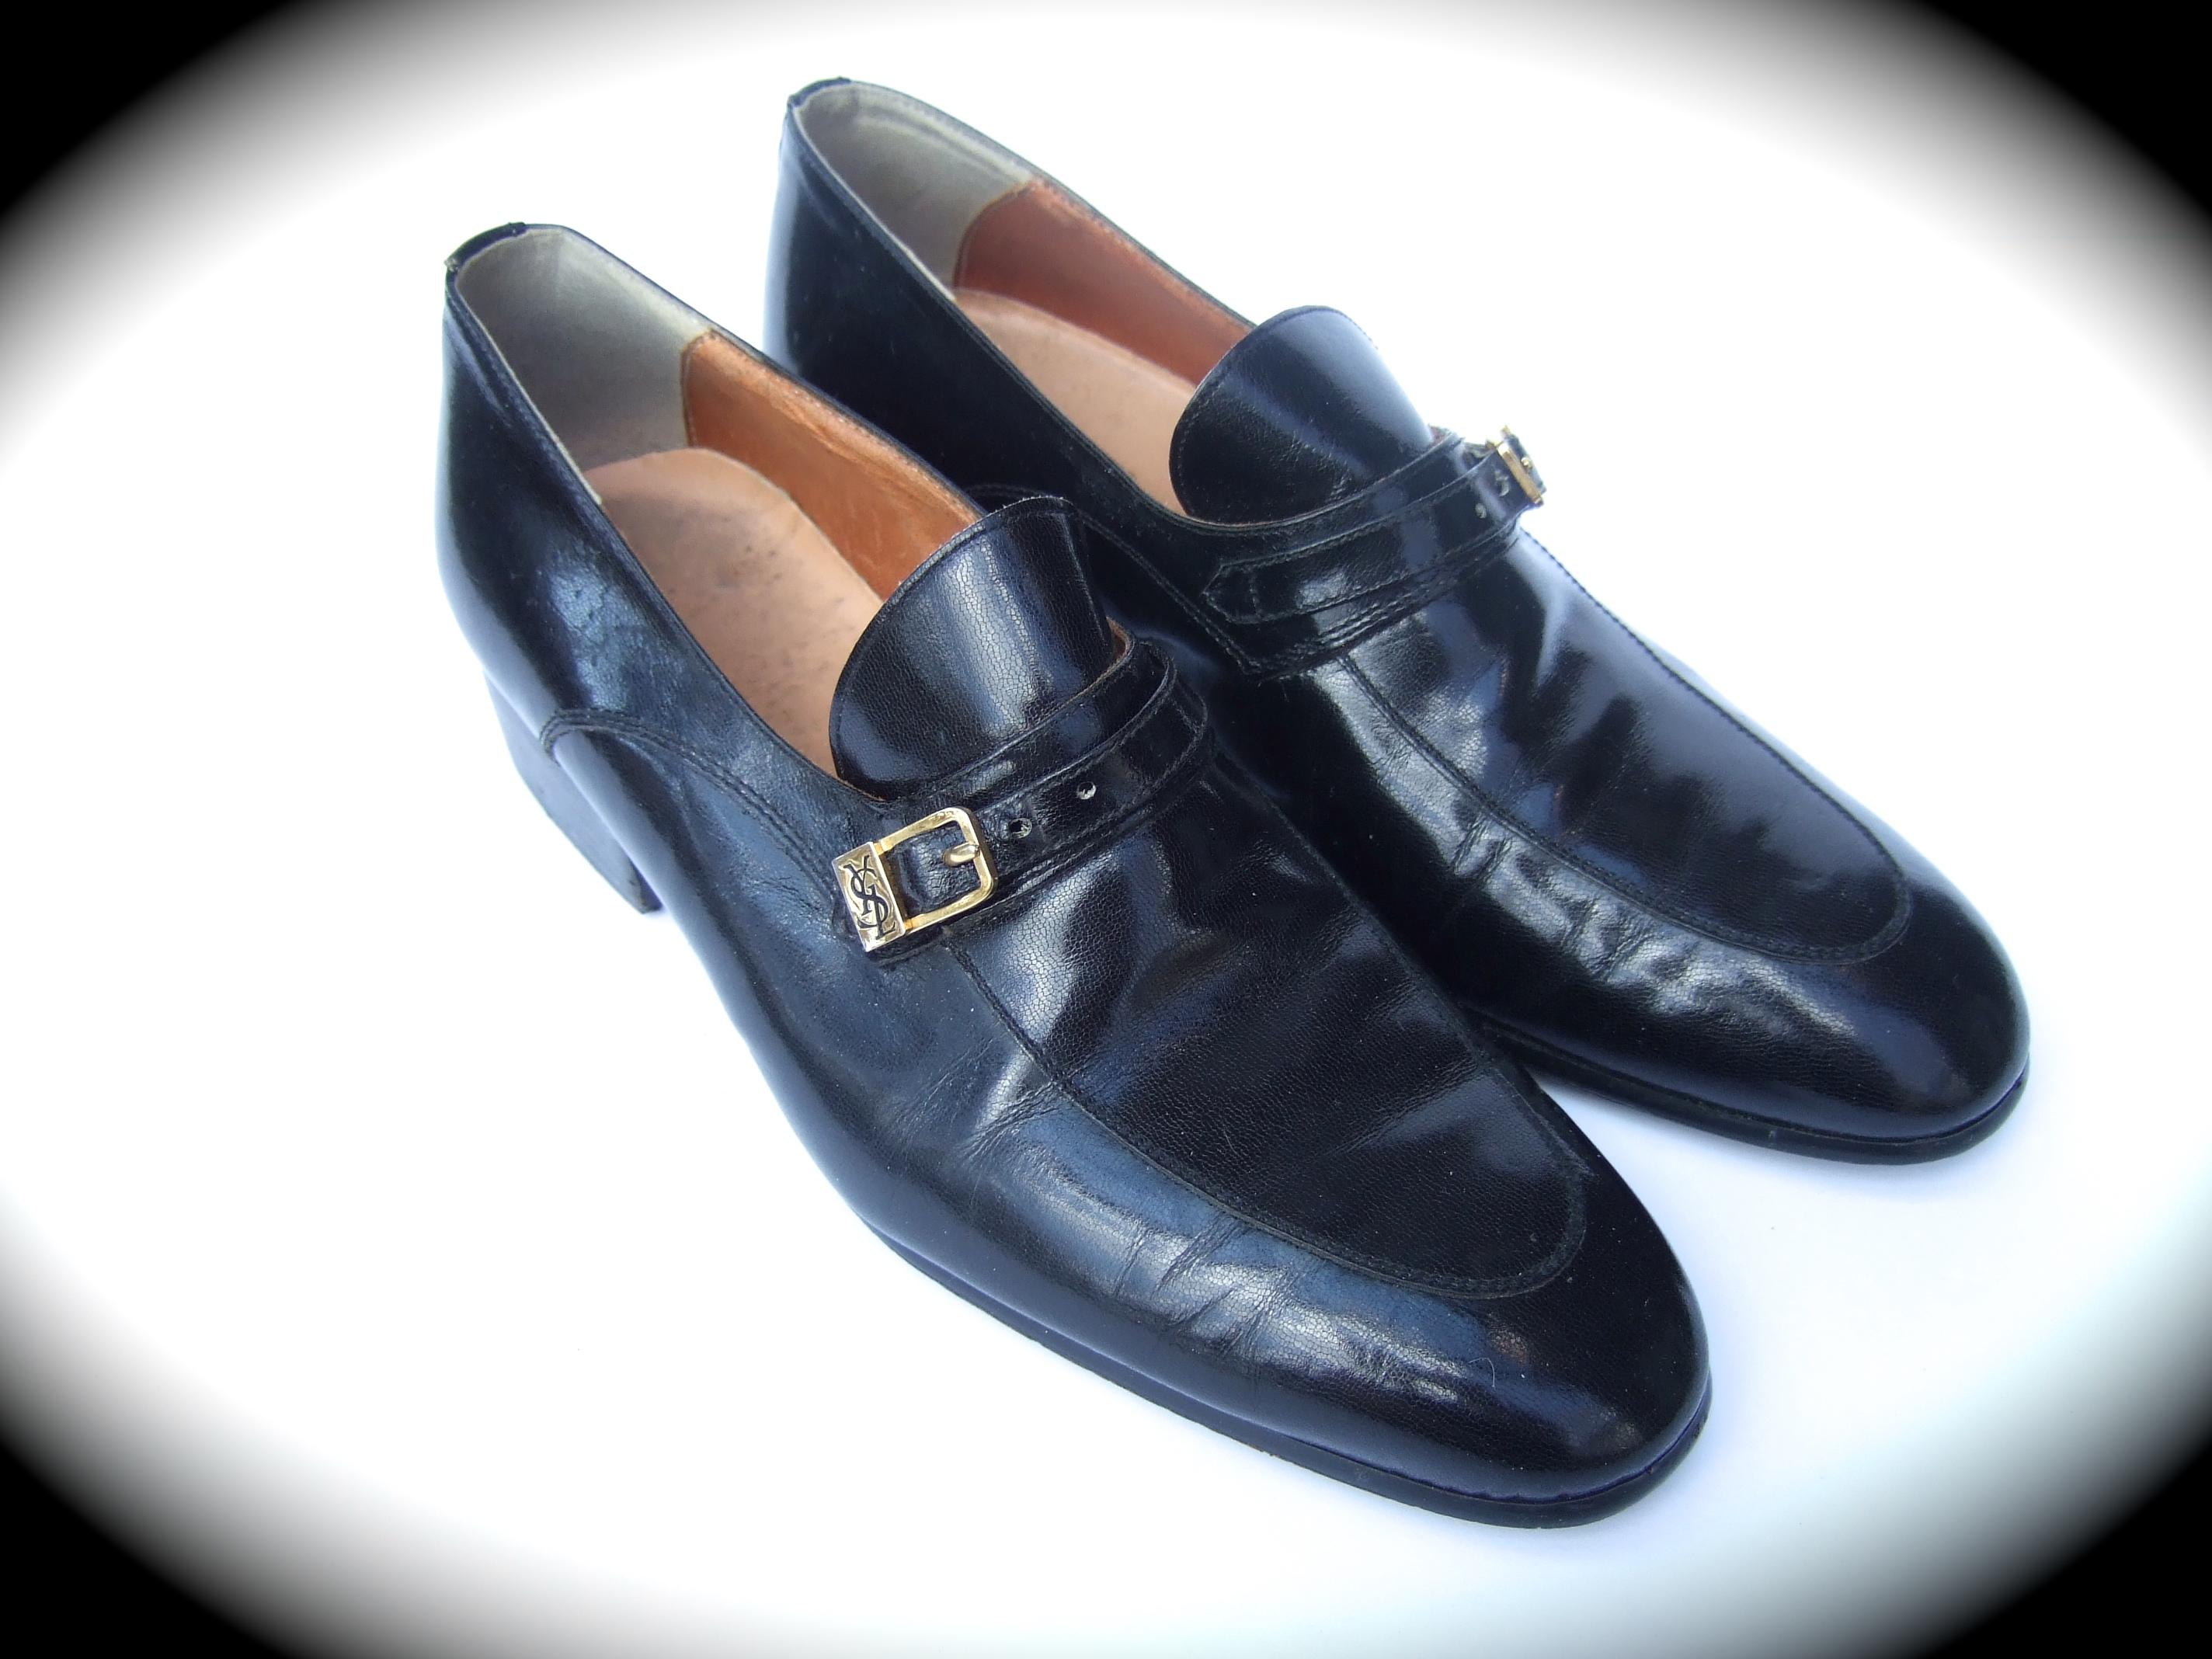 Yves Saint Laurent vintage women's black leather unisex loafers c 1970s
The stylish Italian loafers are constructed with smooth black 
leather. Equivalent to a contemporary US women's size 9  

Adorned with a gilt metal buckle with Saint Laurent's